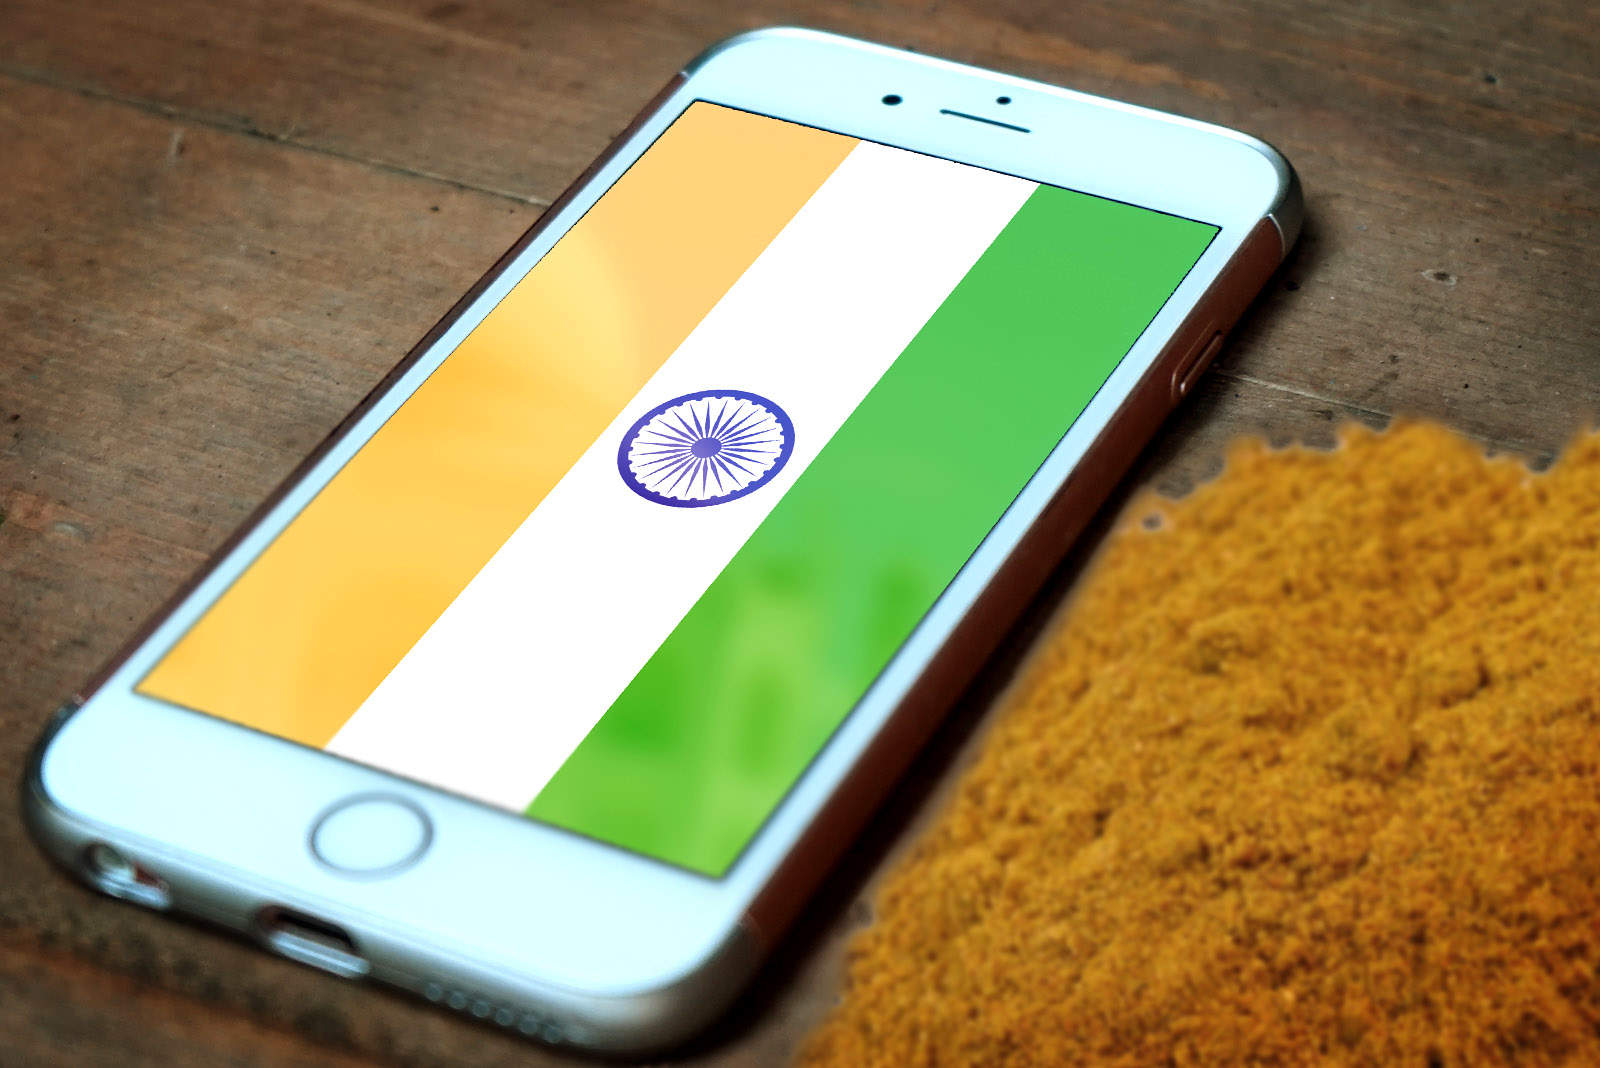 Apple supplier is increasing its ability to build masses of iPhones in India